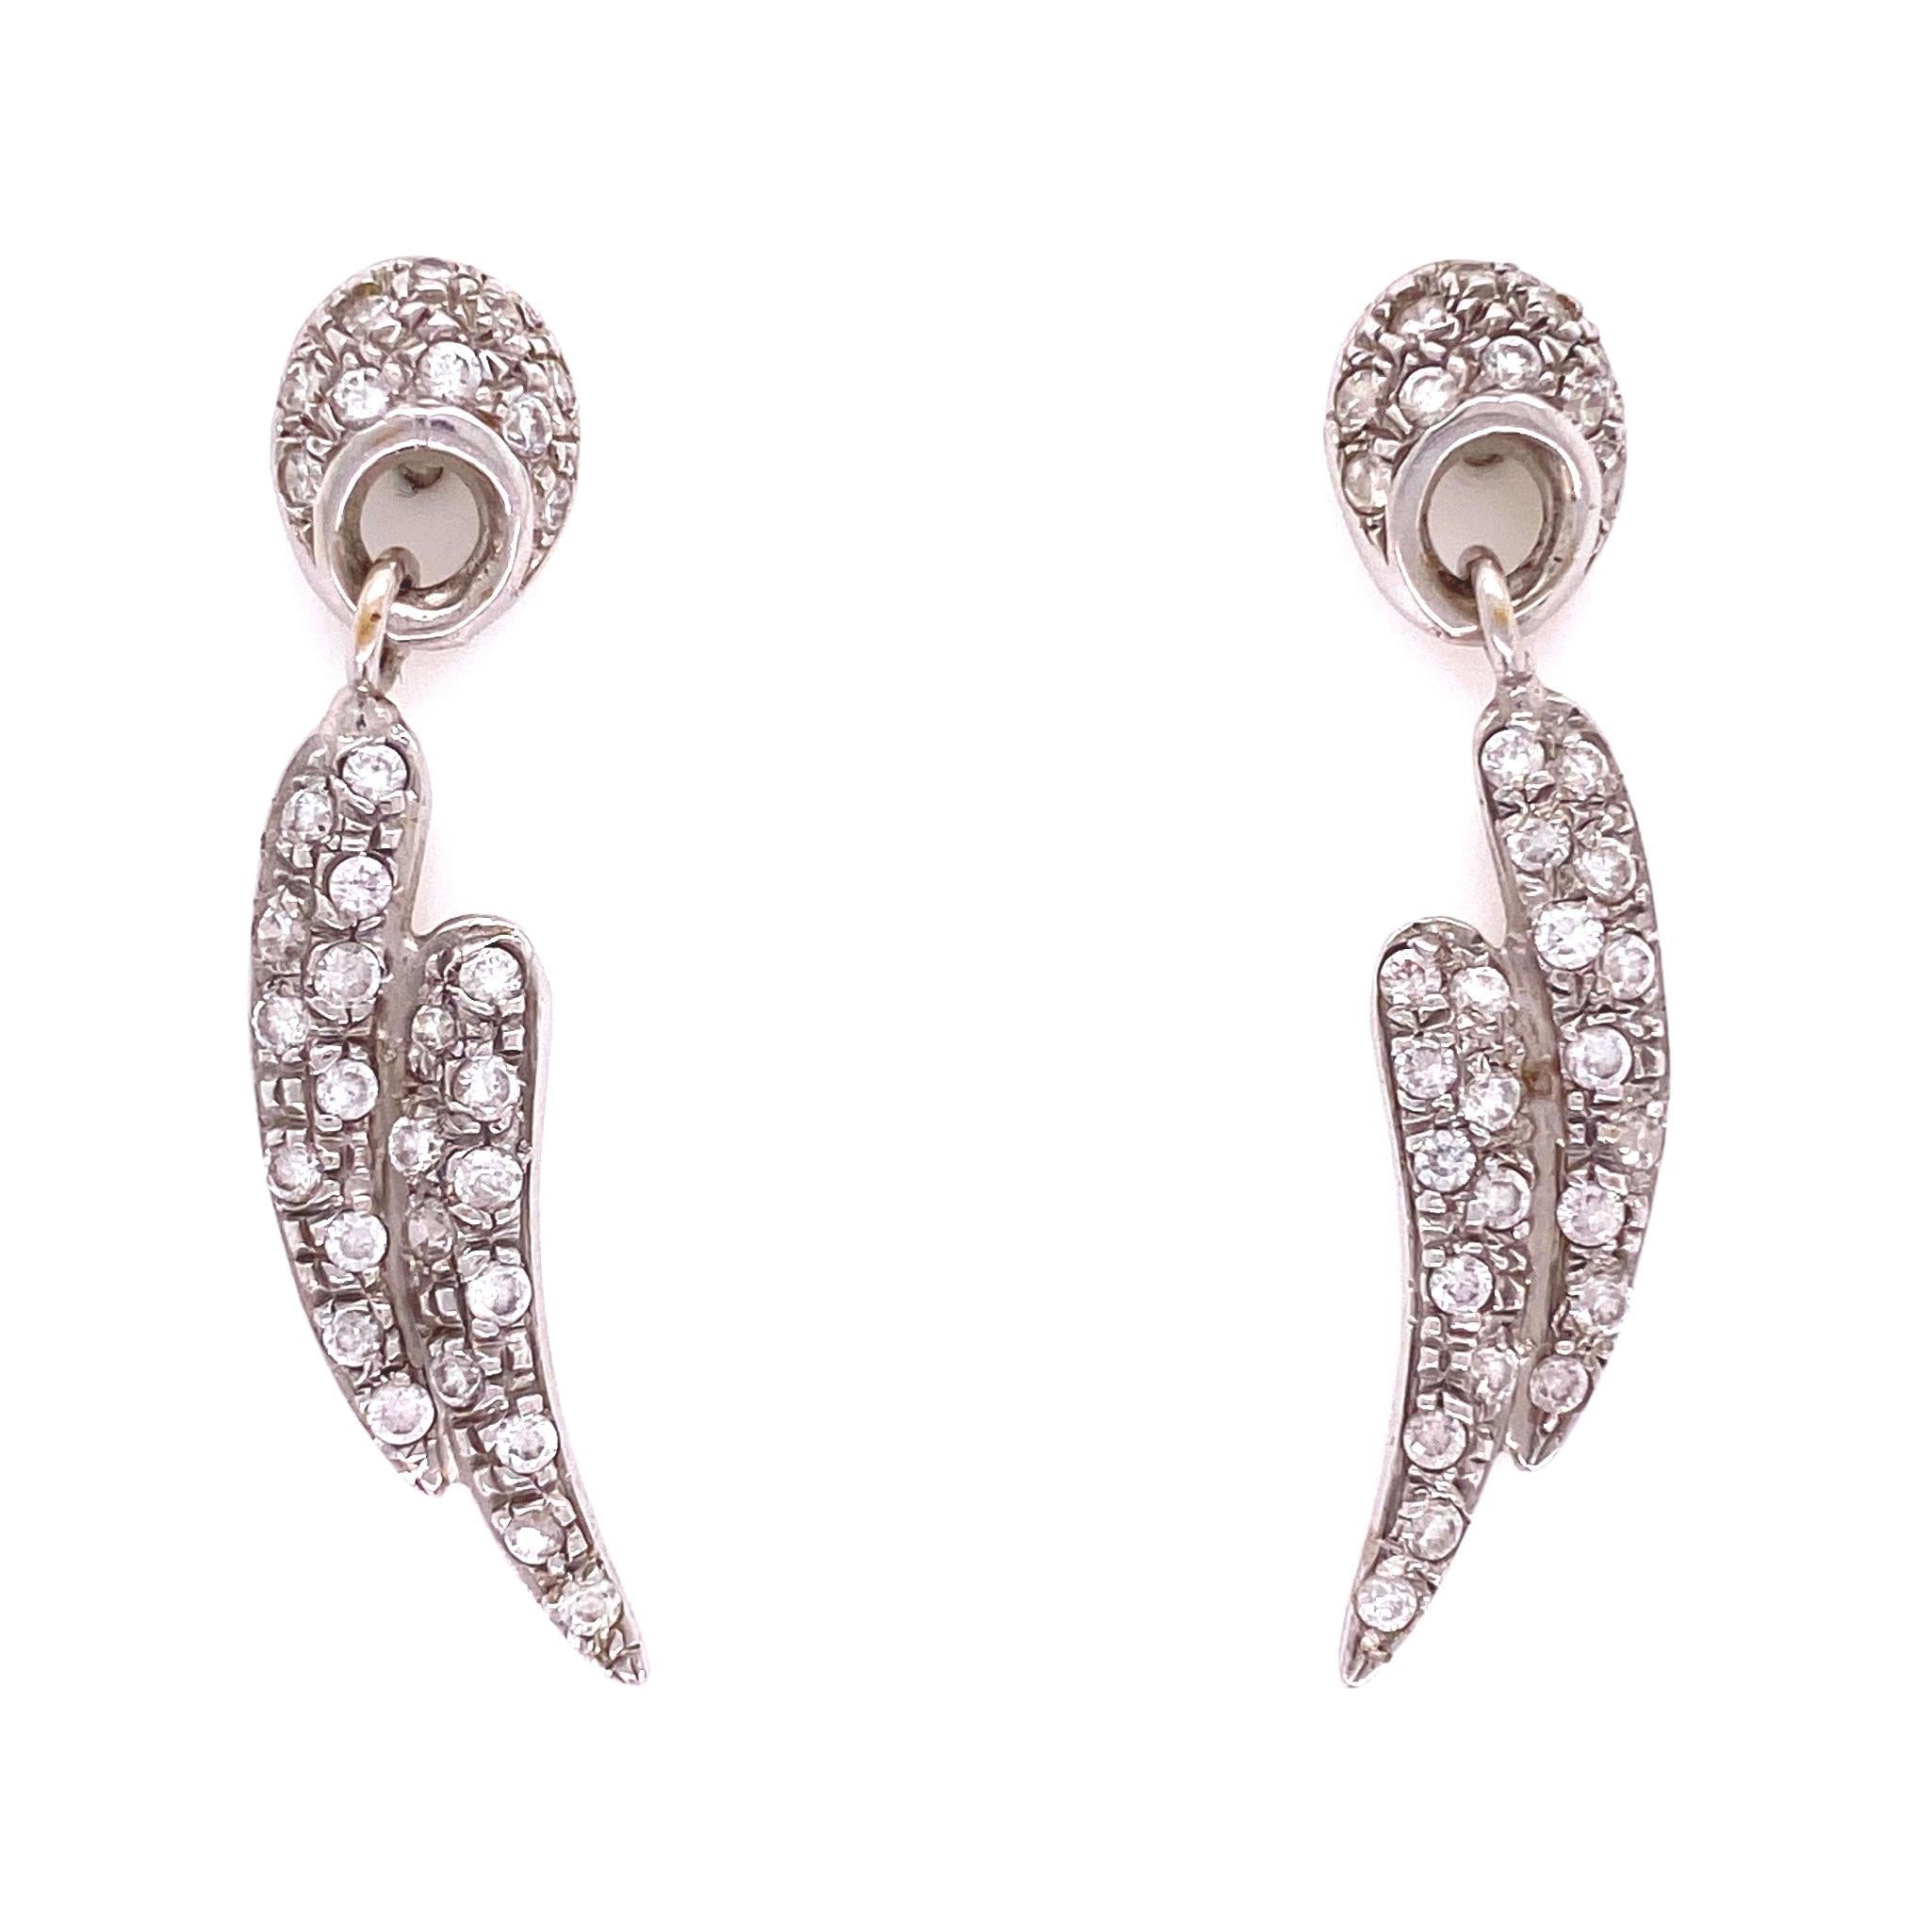 Simply Beautiful! Stylish Pave Diamond Gold Vintage Dangle Drop Earrings. Hand set Diamonds, weighing approx. 1.00tcw. Hand crafted Wing design in 14K White Gold. Post system. Measuring approx. 1.80” Long. More Beautiful in Real time! Sure to be